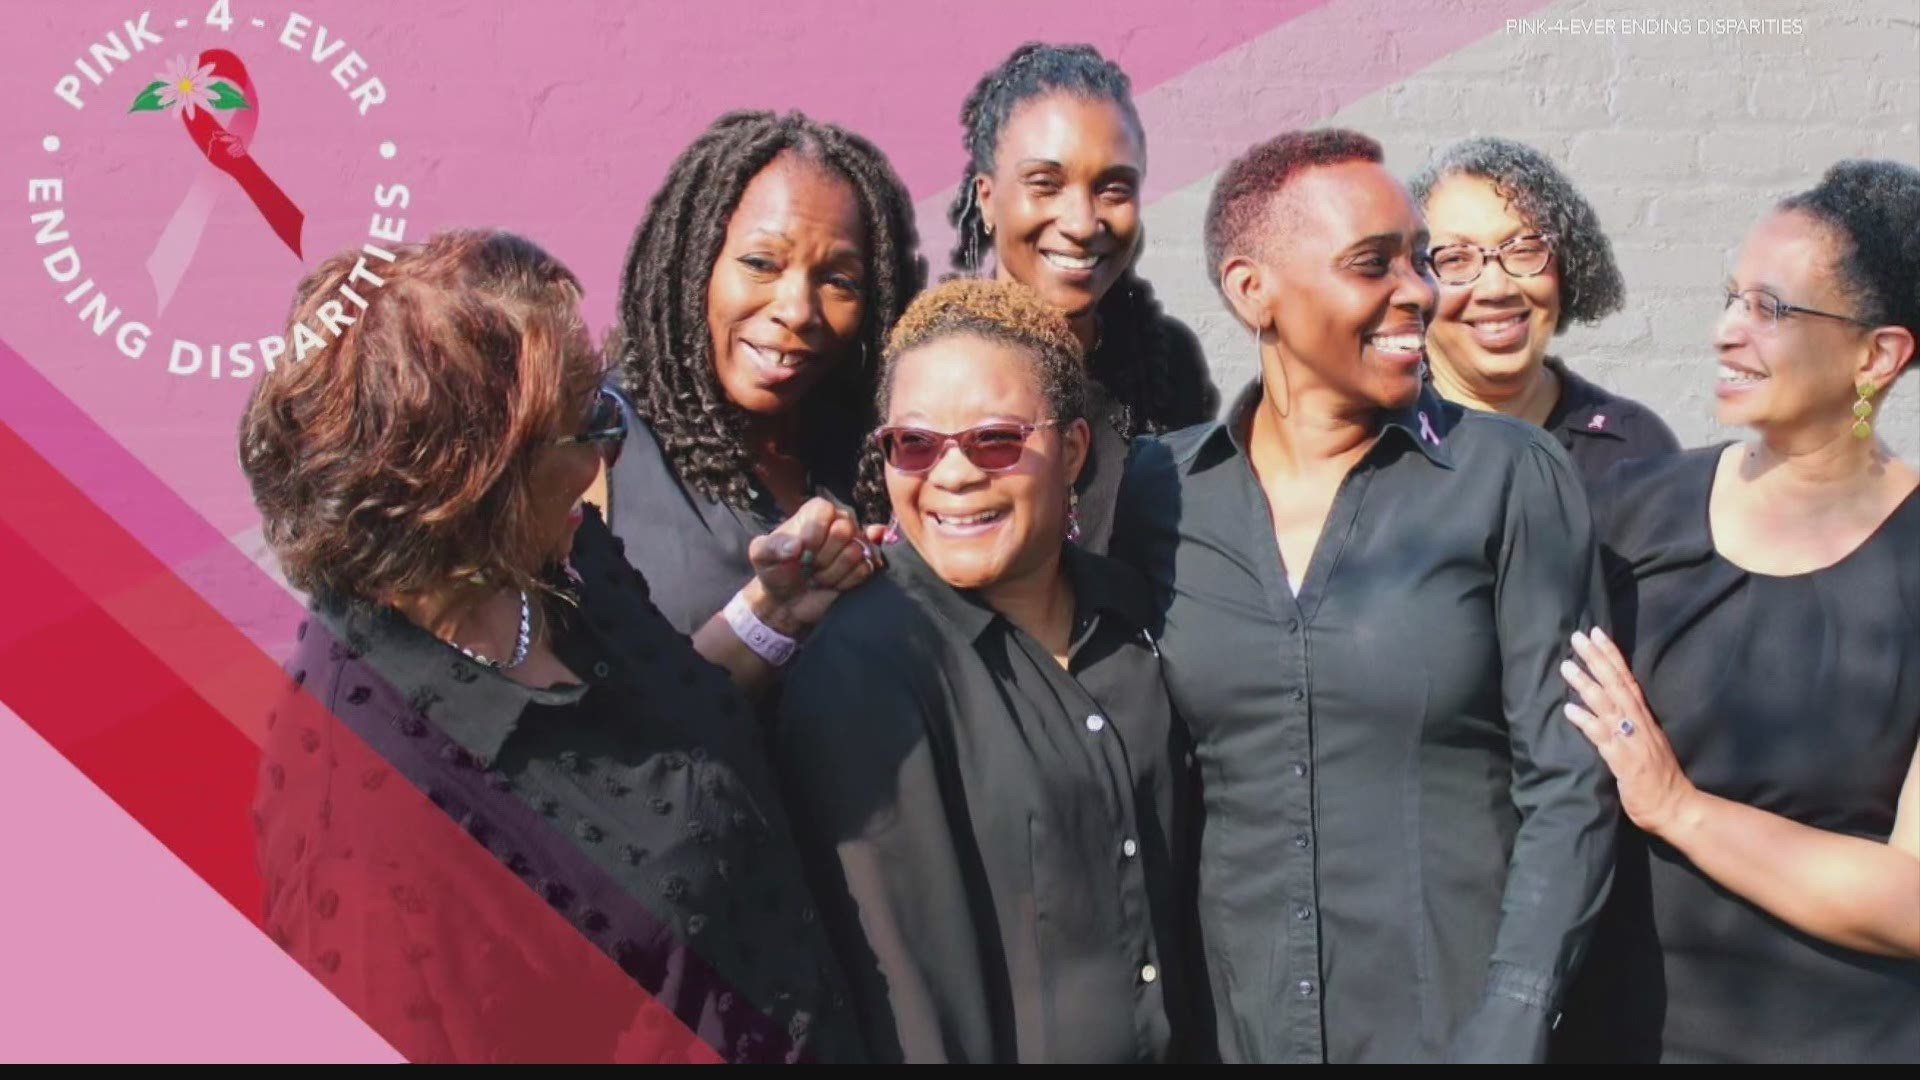 Pink-4-Ever and the R.E.D. Alliance are coming together to address the disparities Black and other minority women face when it comes to breast cancer diagnoses.